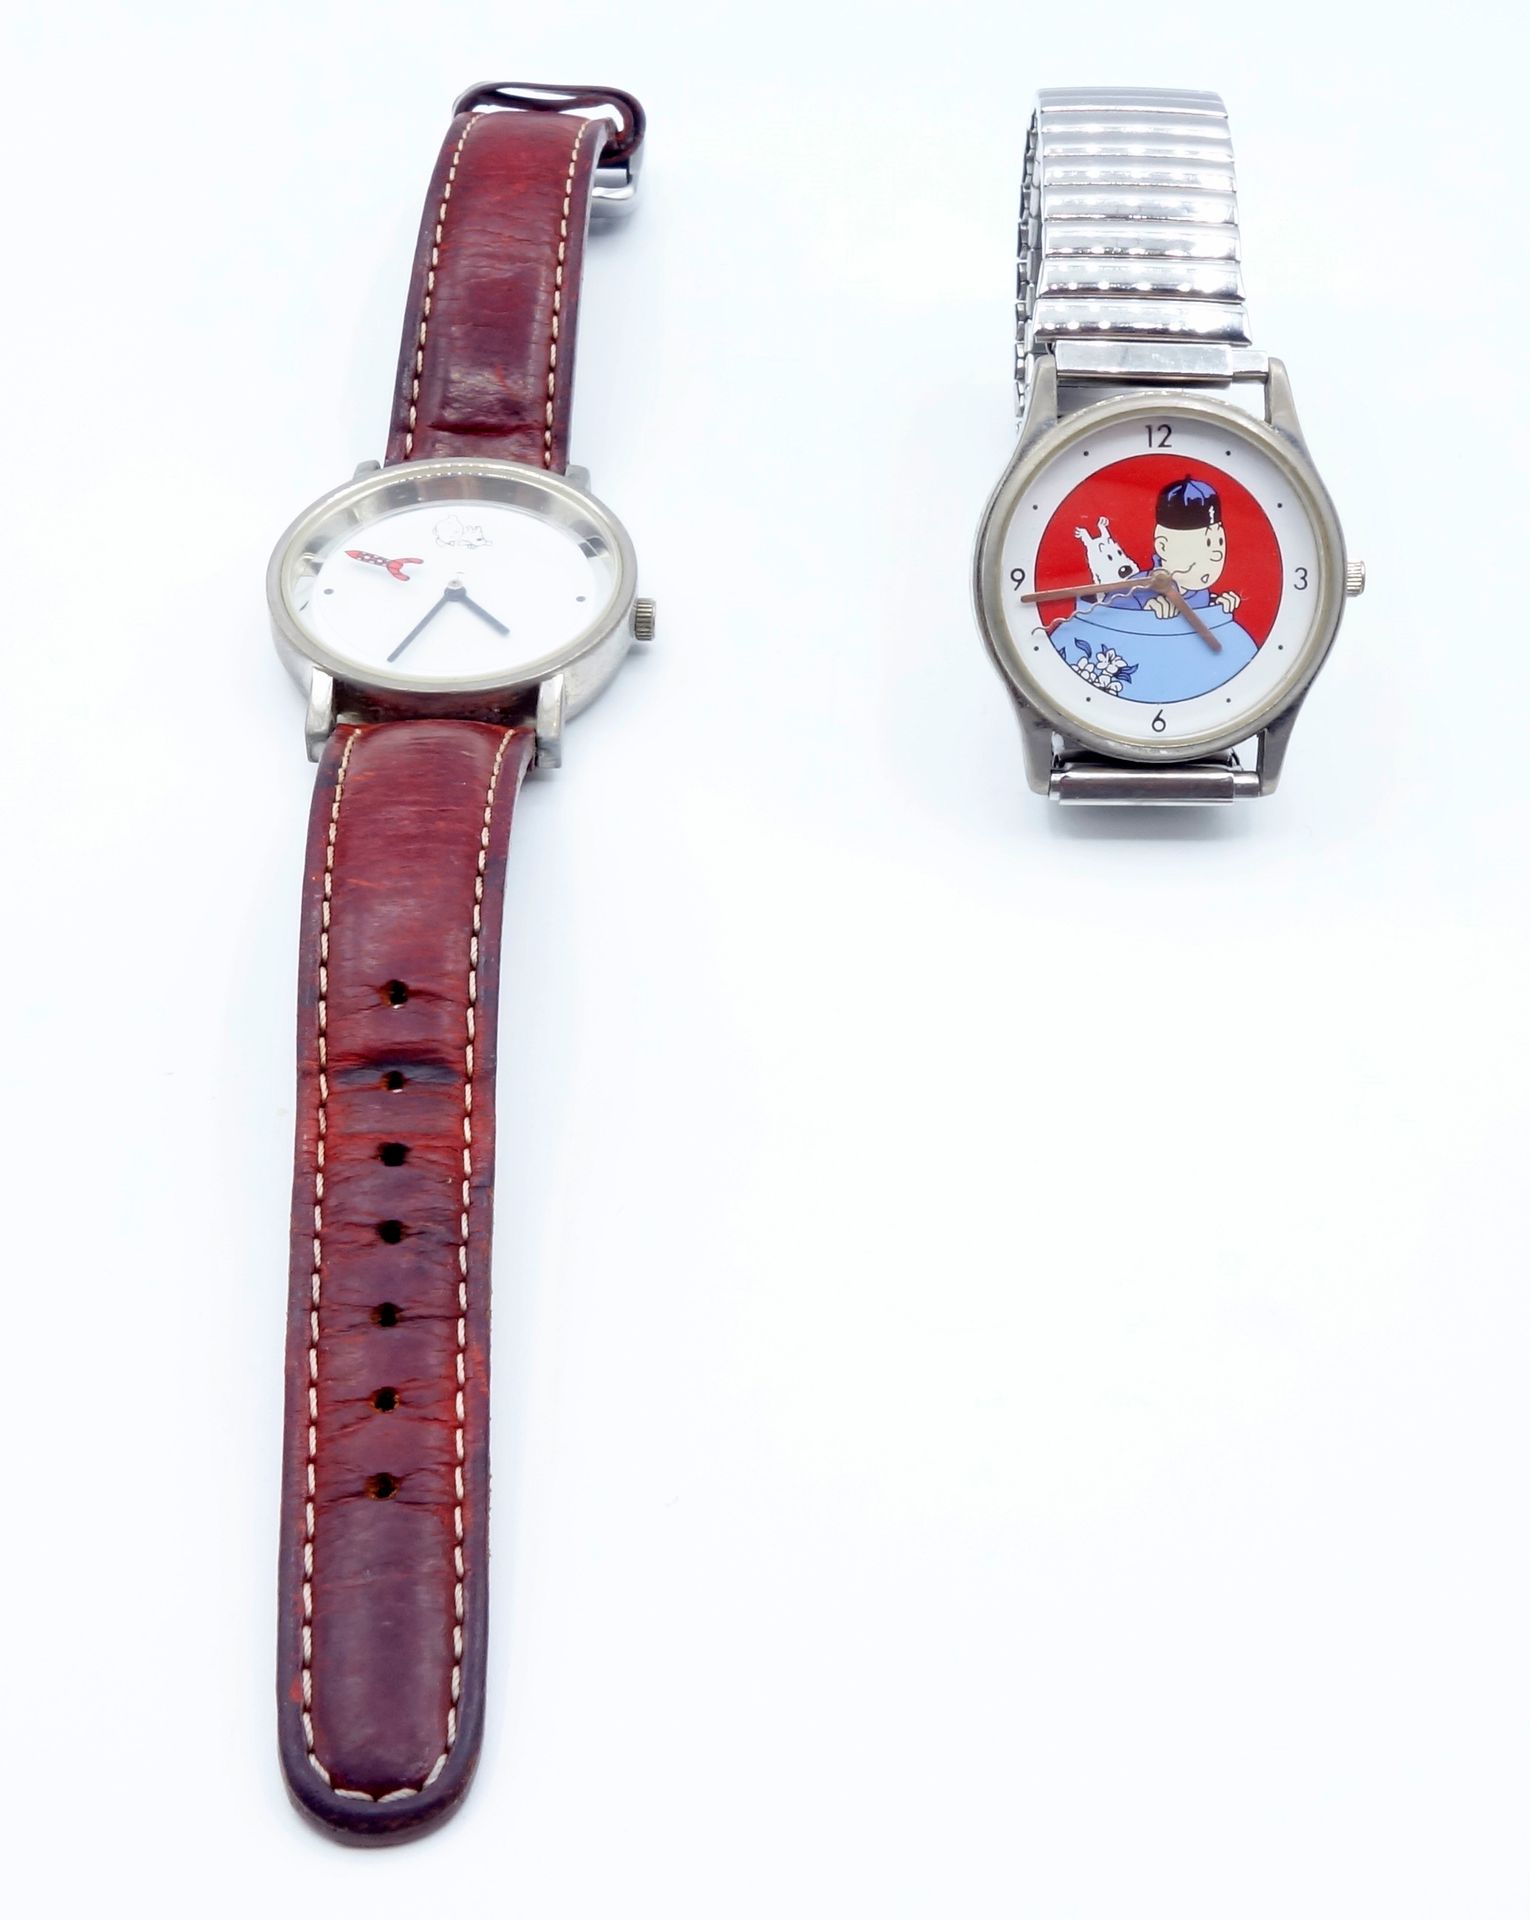 DIVERS 
Set of 3 watches, 2 Tintin (Citime) and 1 Le Chat. Very good condition.